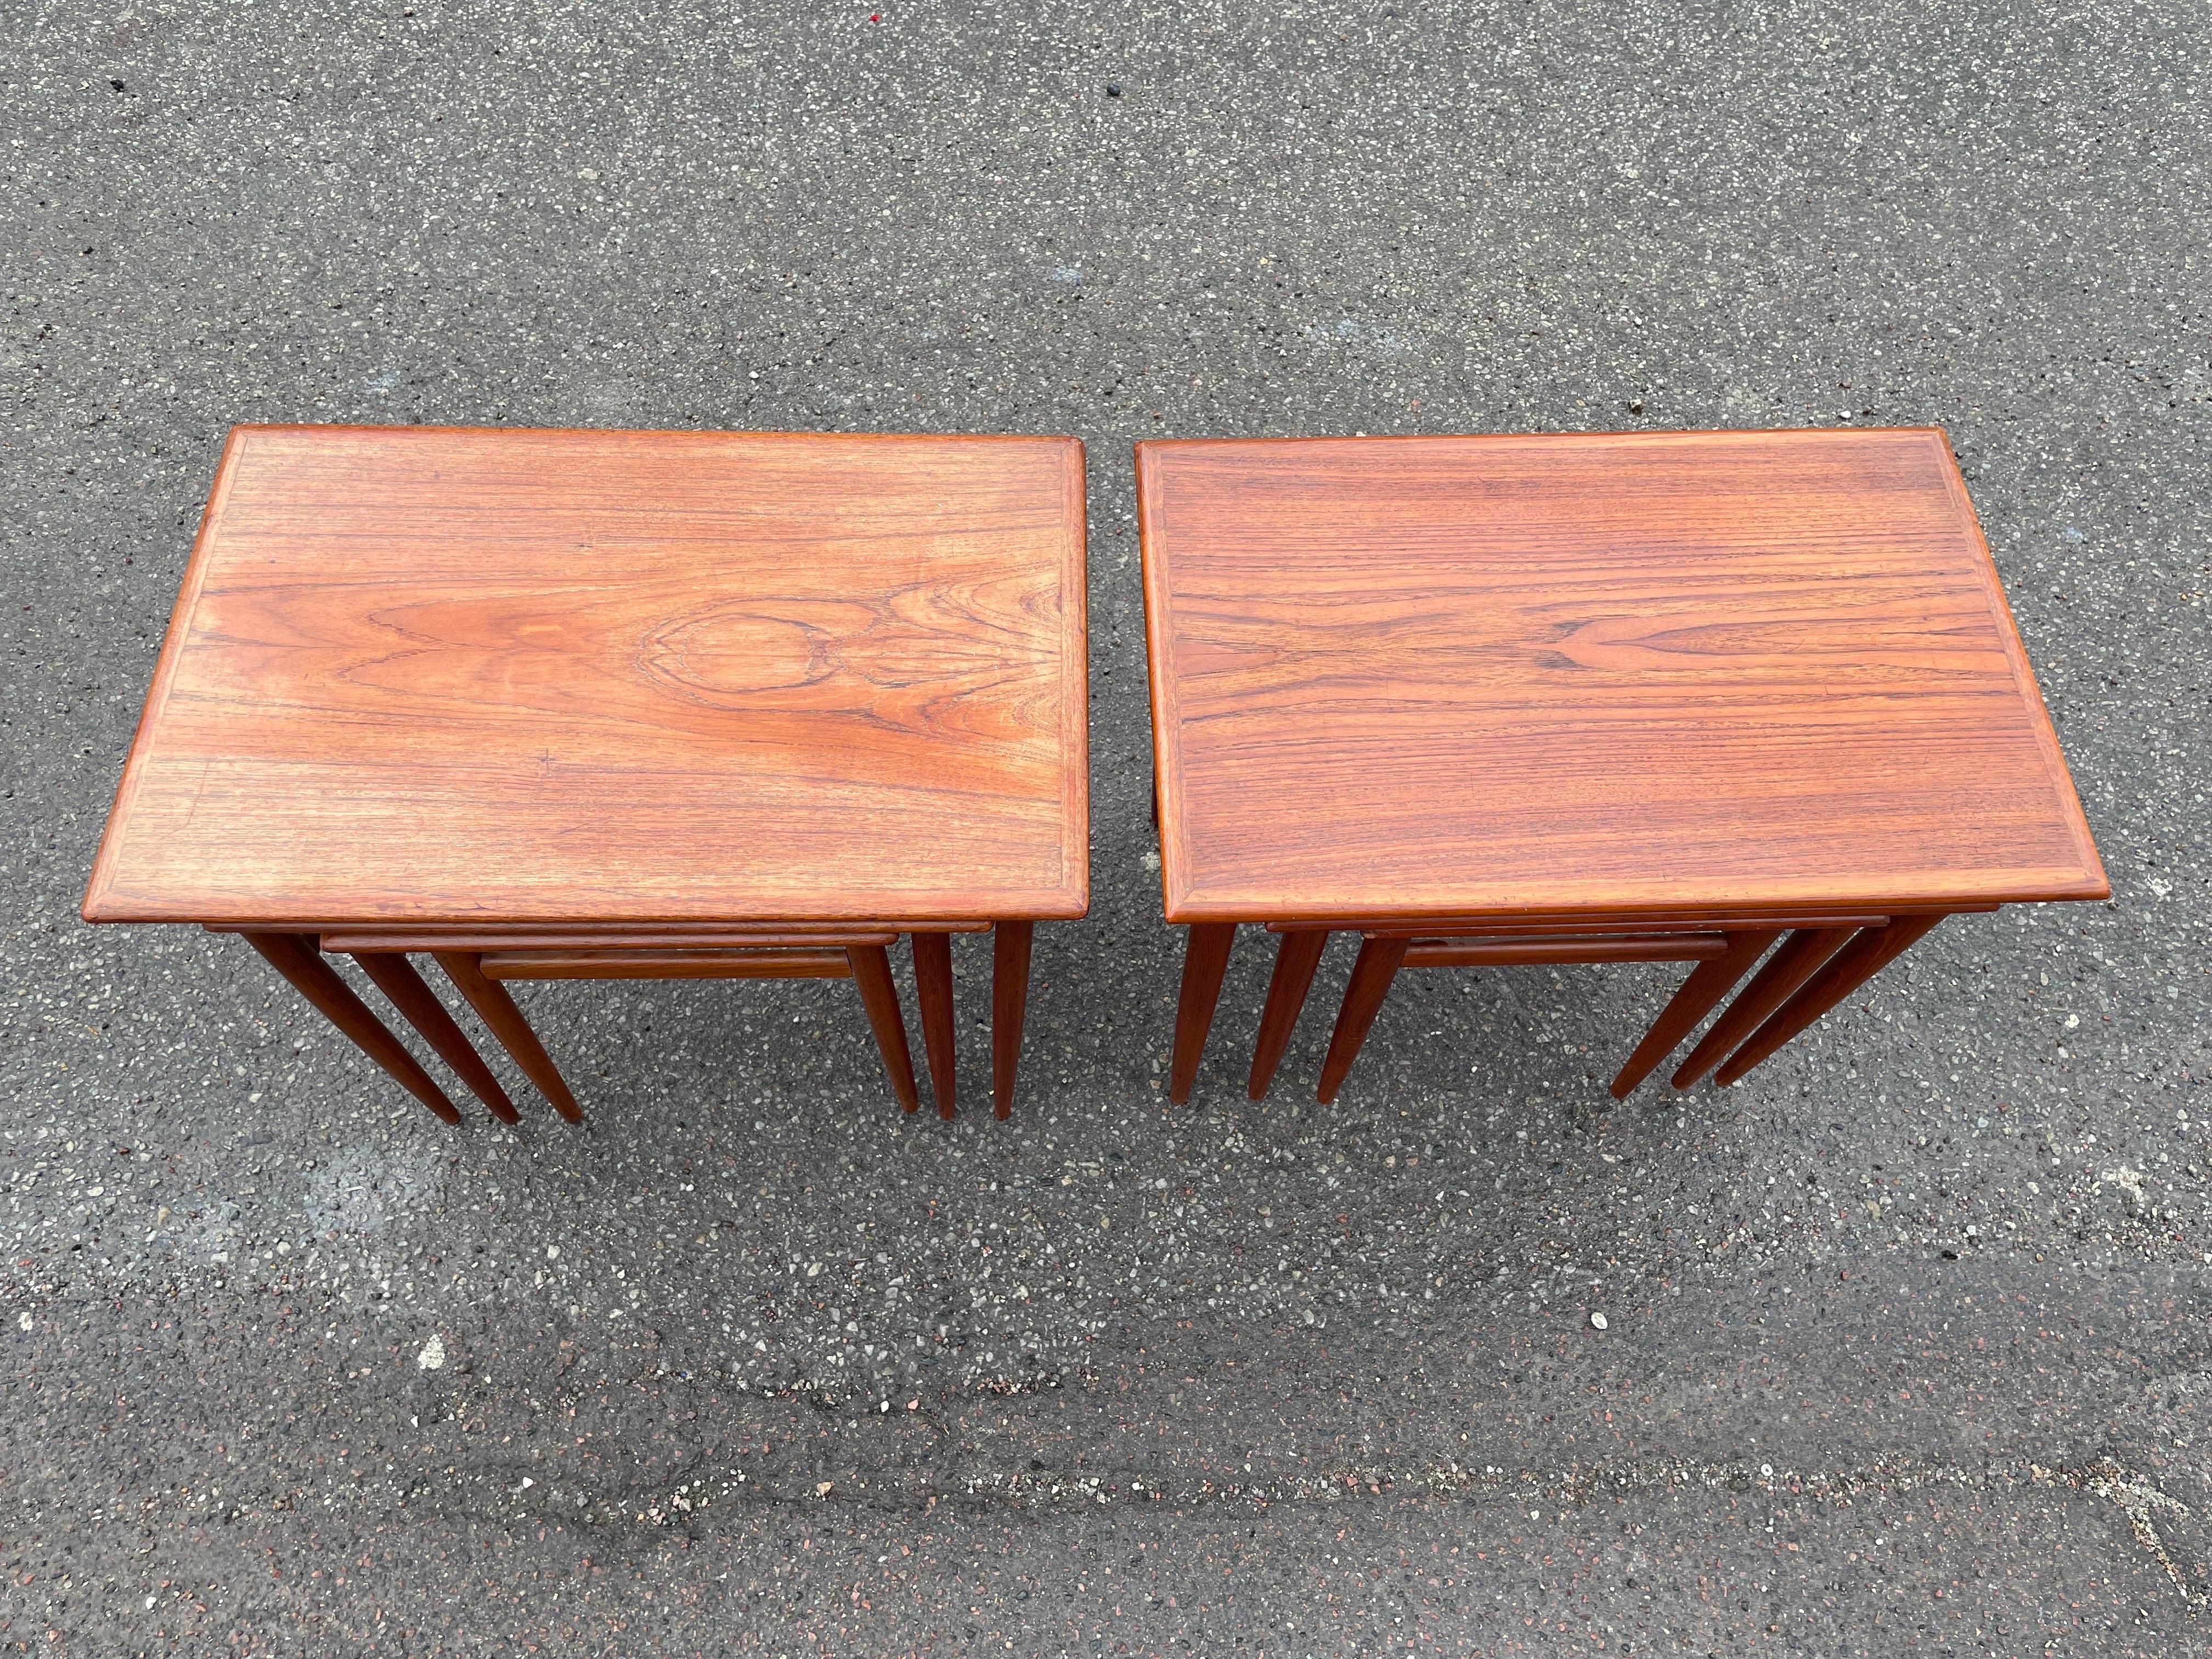 Introducing a stunning set of Danish teak nesting tables straight out of the 1960s! These tables exude a timeless elegance that is sure to make a statement in any room.

Crafted from high-quality teak wood, these tables feature a sleek and